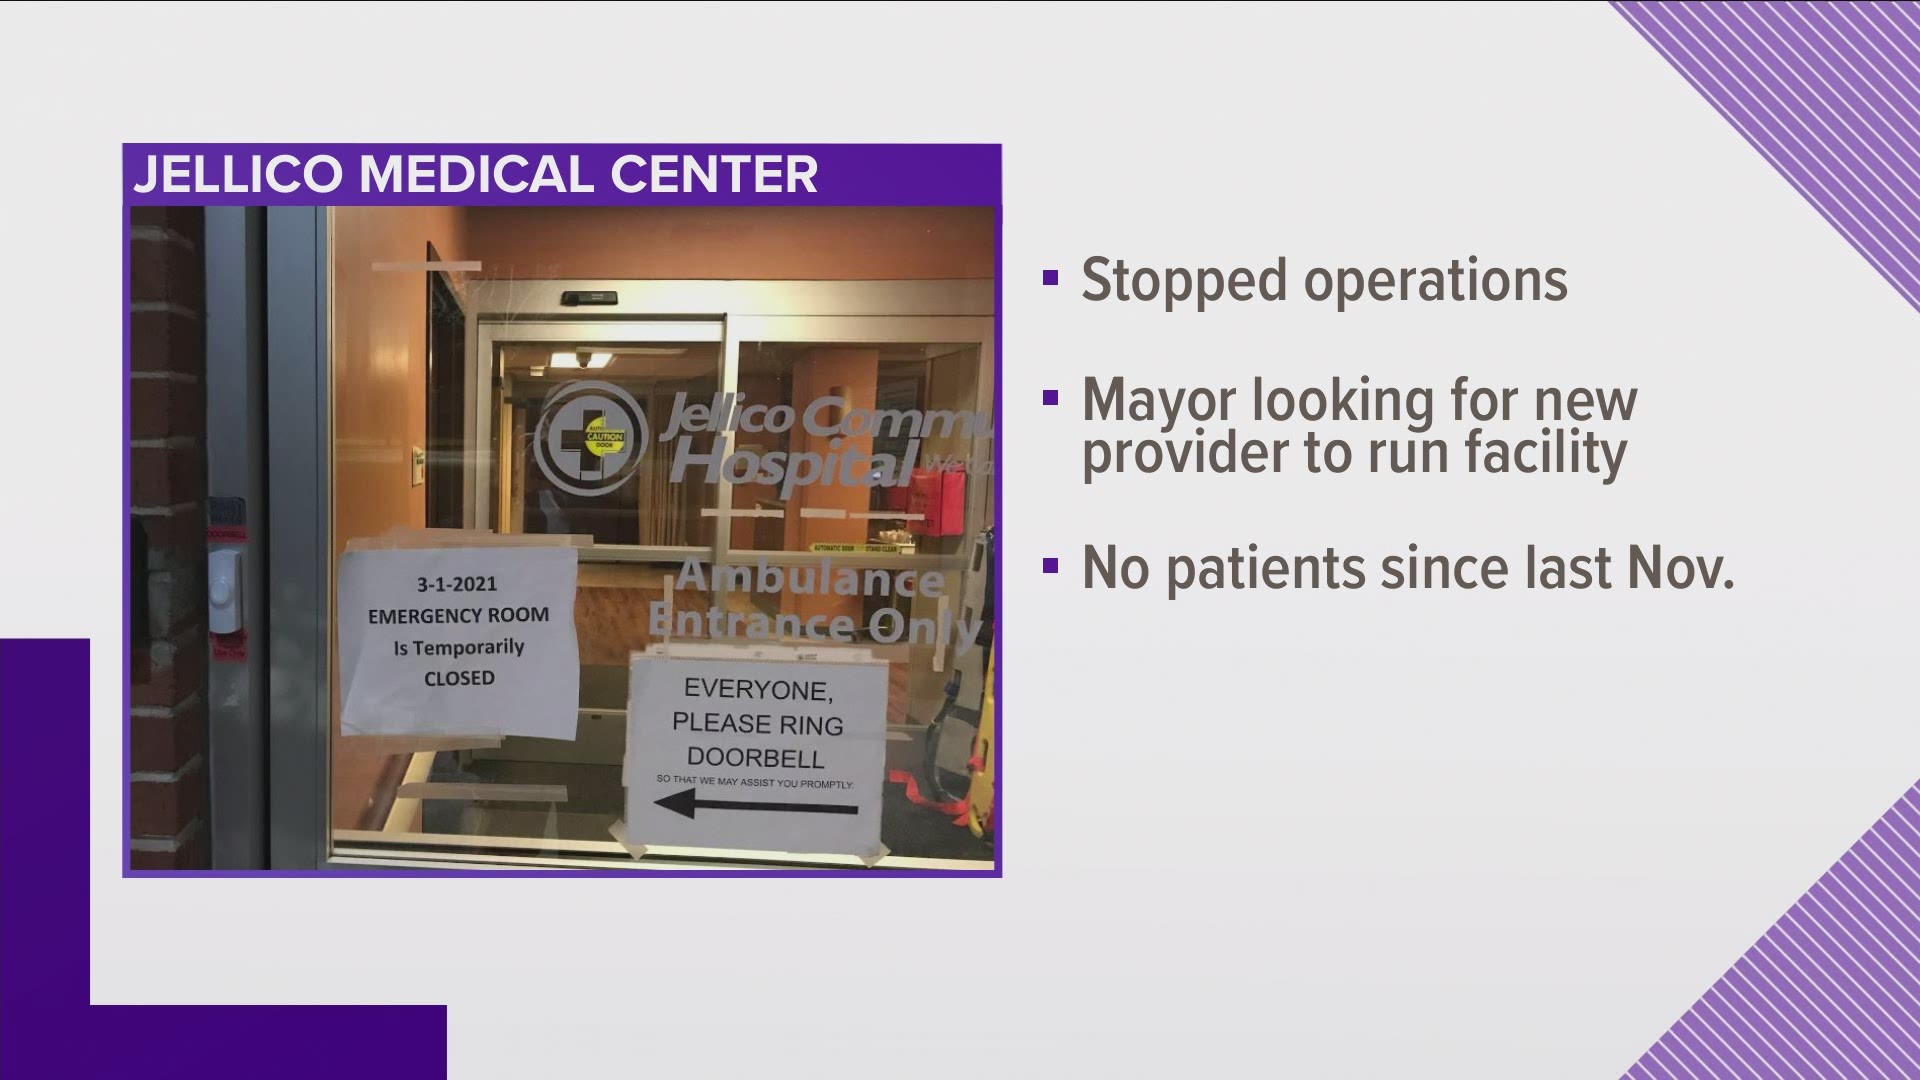 The only hospital in Jellico is now closed. The CEO of Rennova Health said his company stopped operations after the city council ordered it to leave last week.